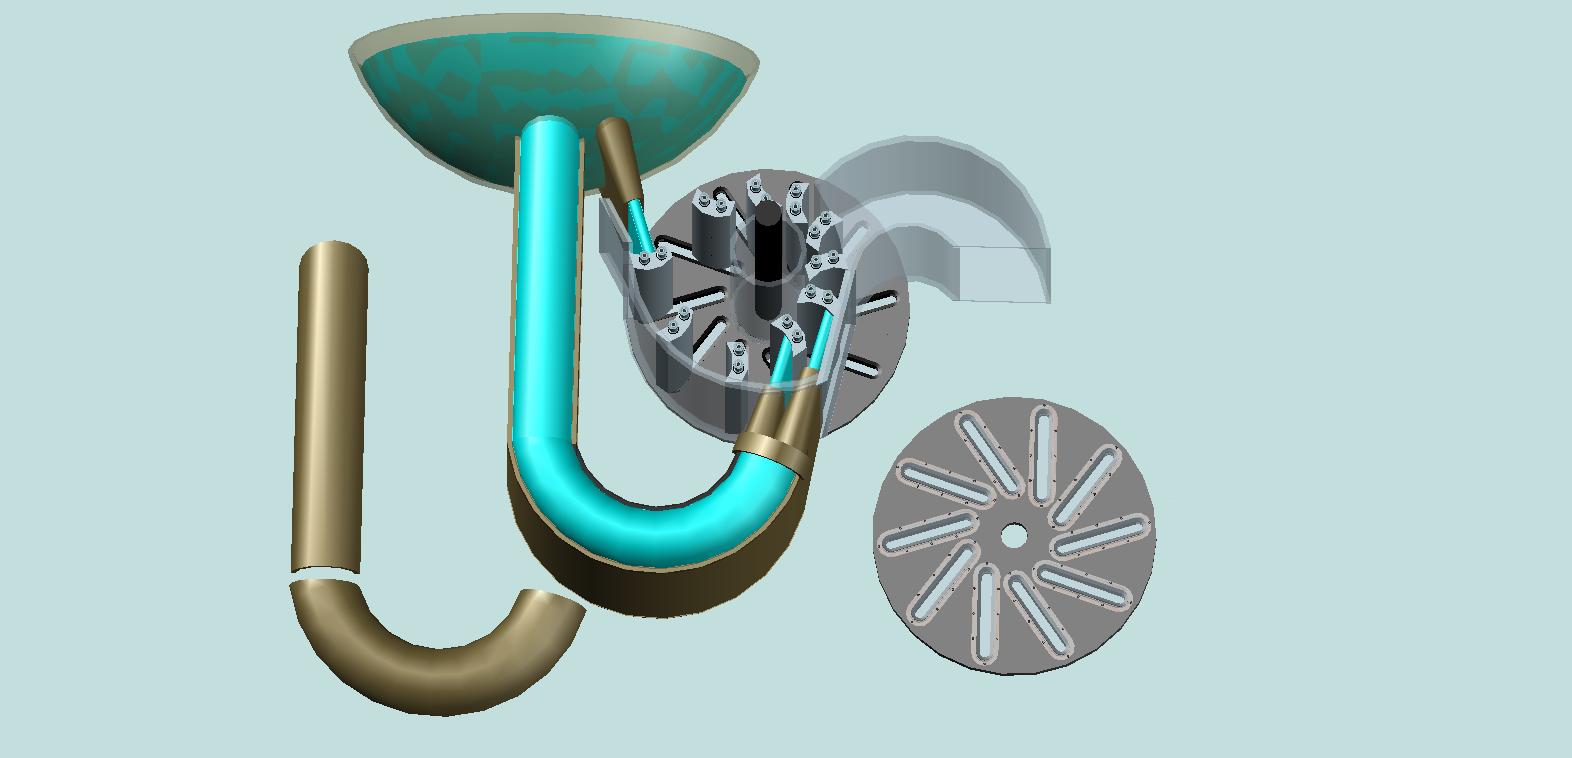 The appearance of this variant of the rotor without front disk and the upper parts of the tube, which feeds water through the lower nozzles